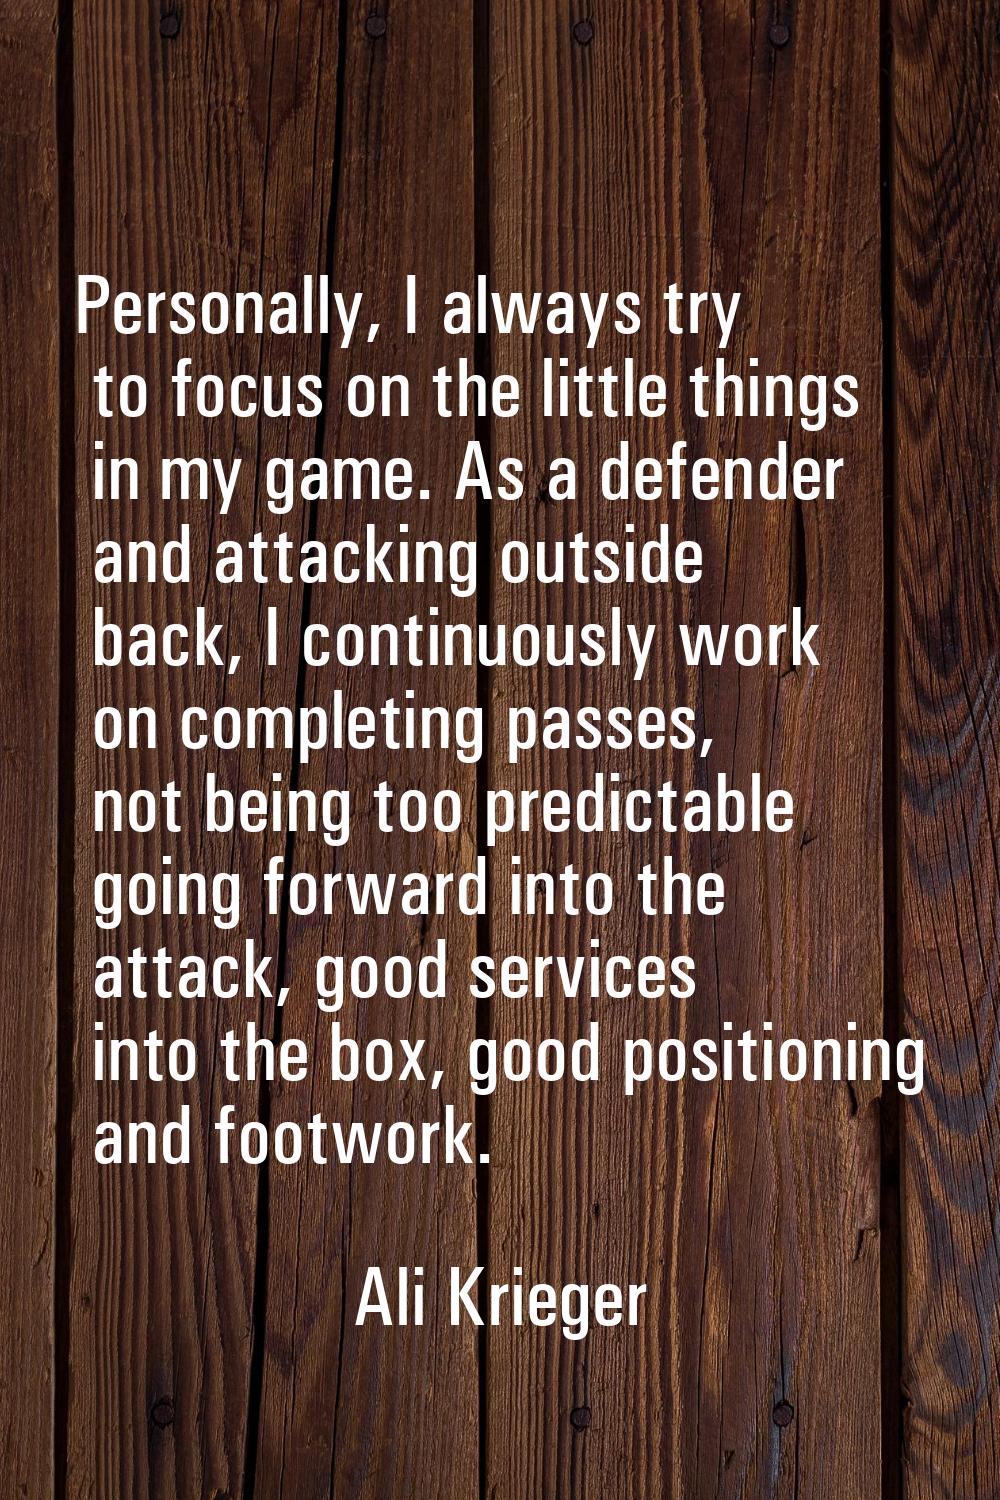 Personally, I always try to focus on the little things in my game. As a defender and attacking outs